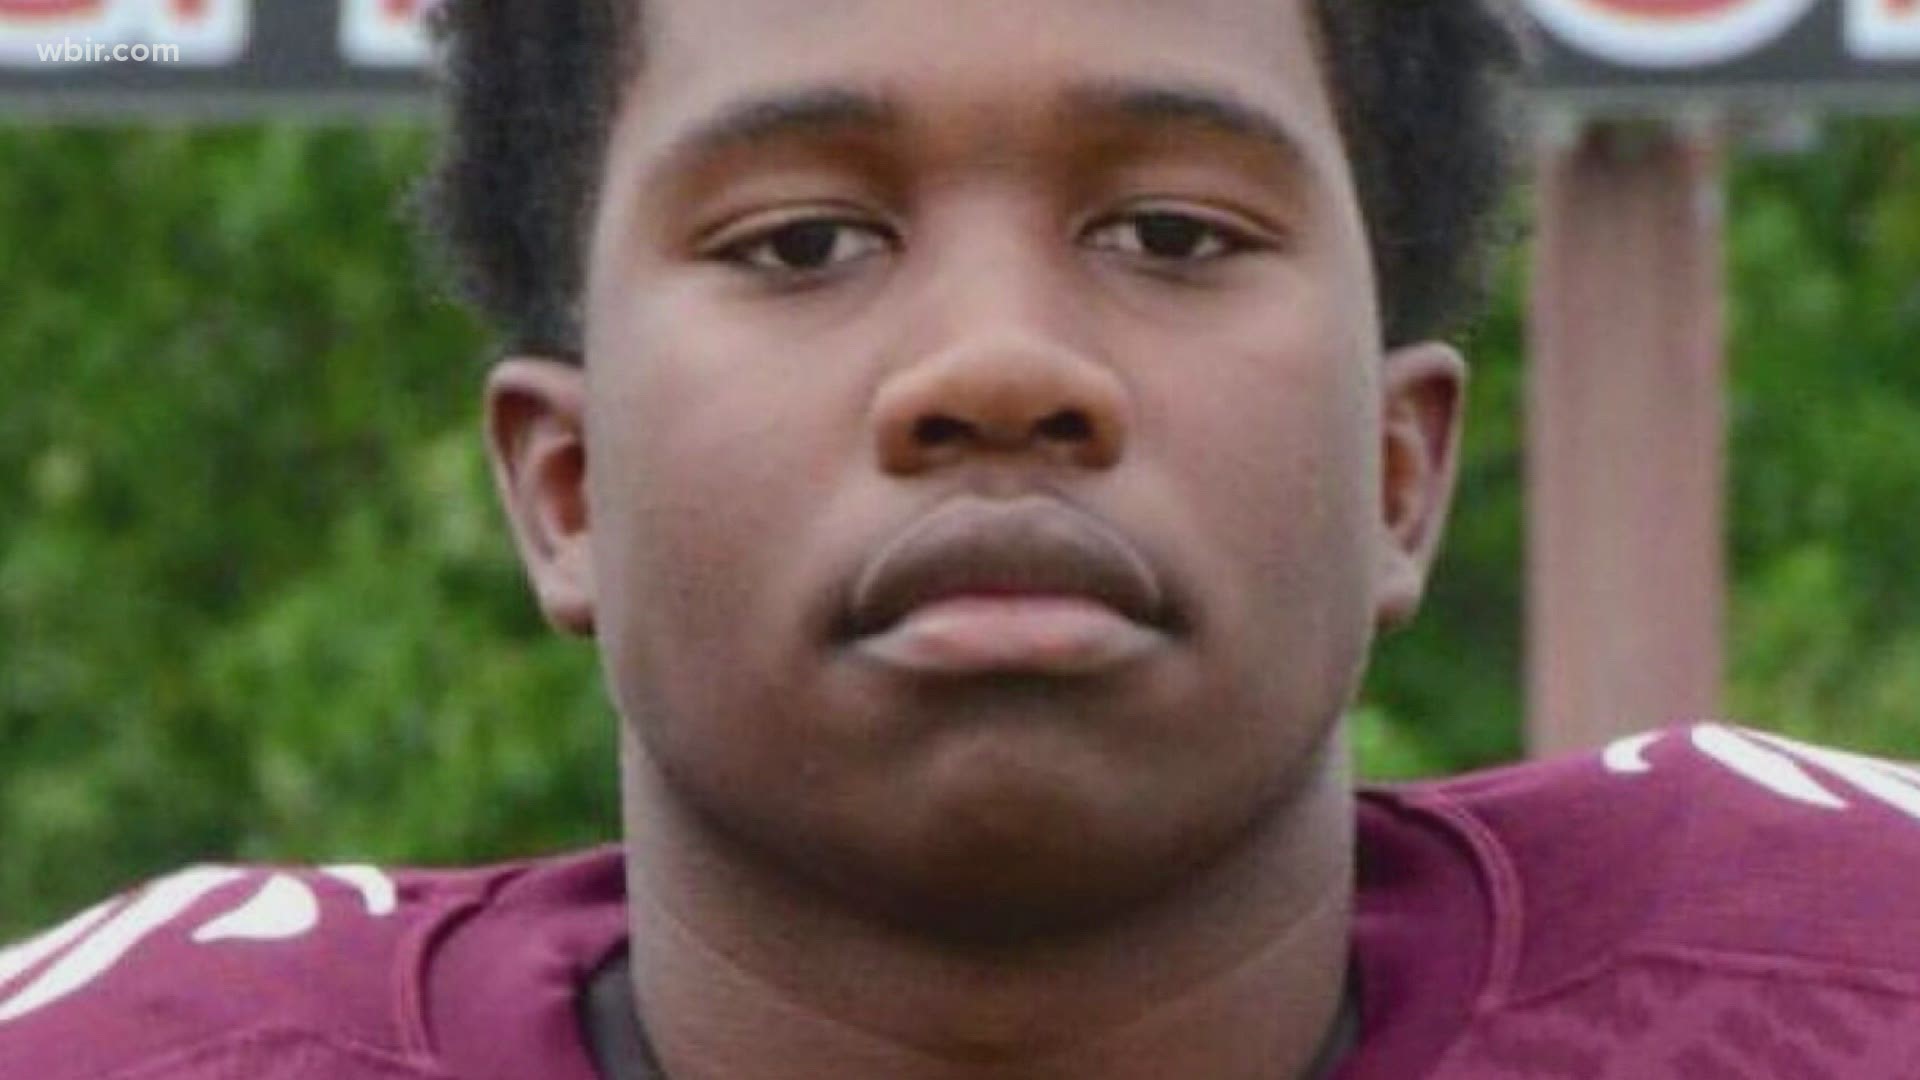 The Fulton football player was 15 years old when he died shielding a group of his friends from gunfire.